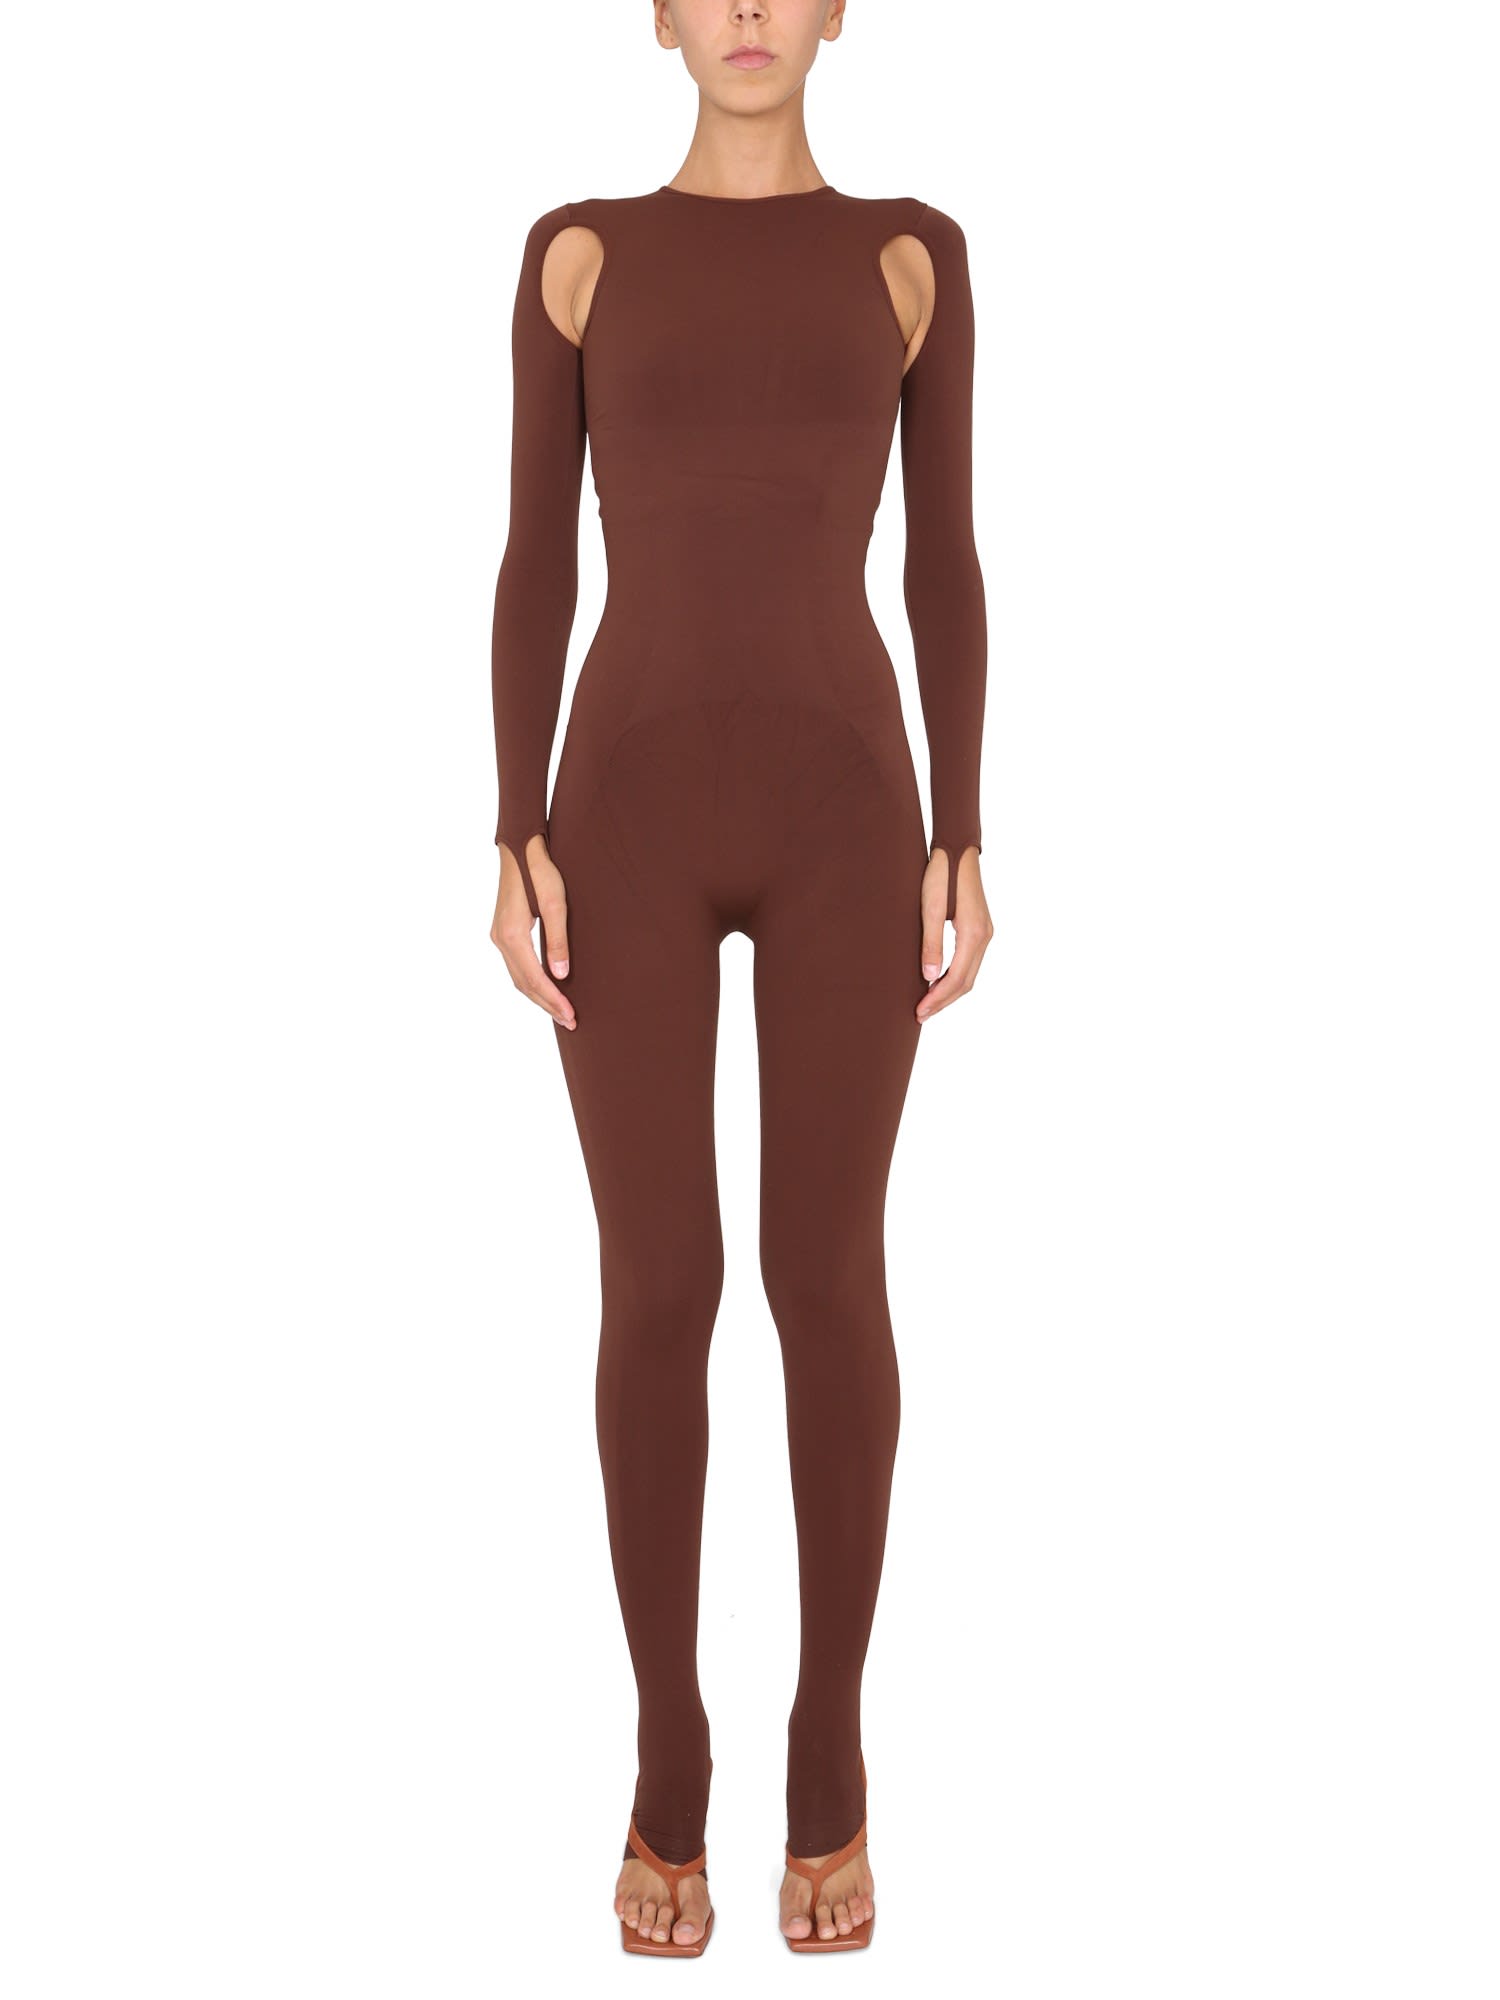 ANDREADAMO Full Jumpsuit With Cut-out Details